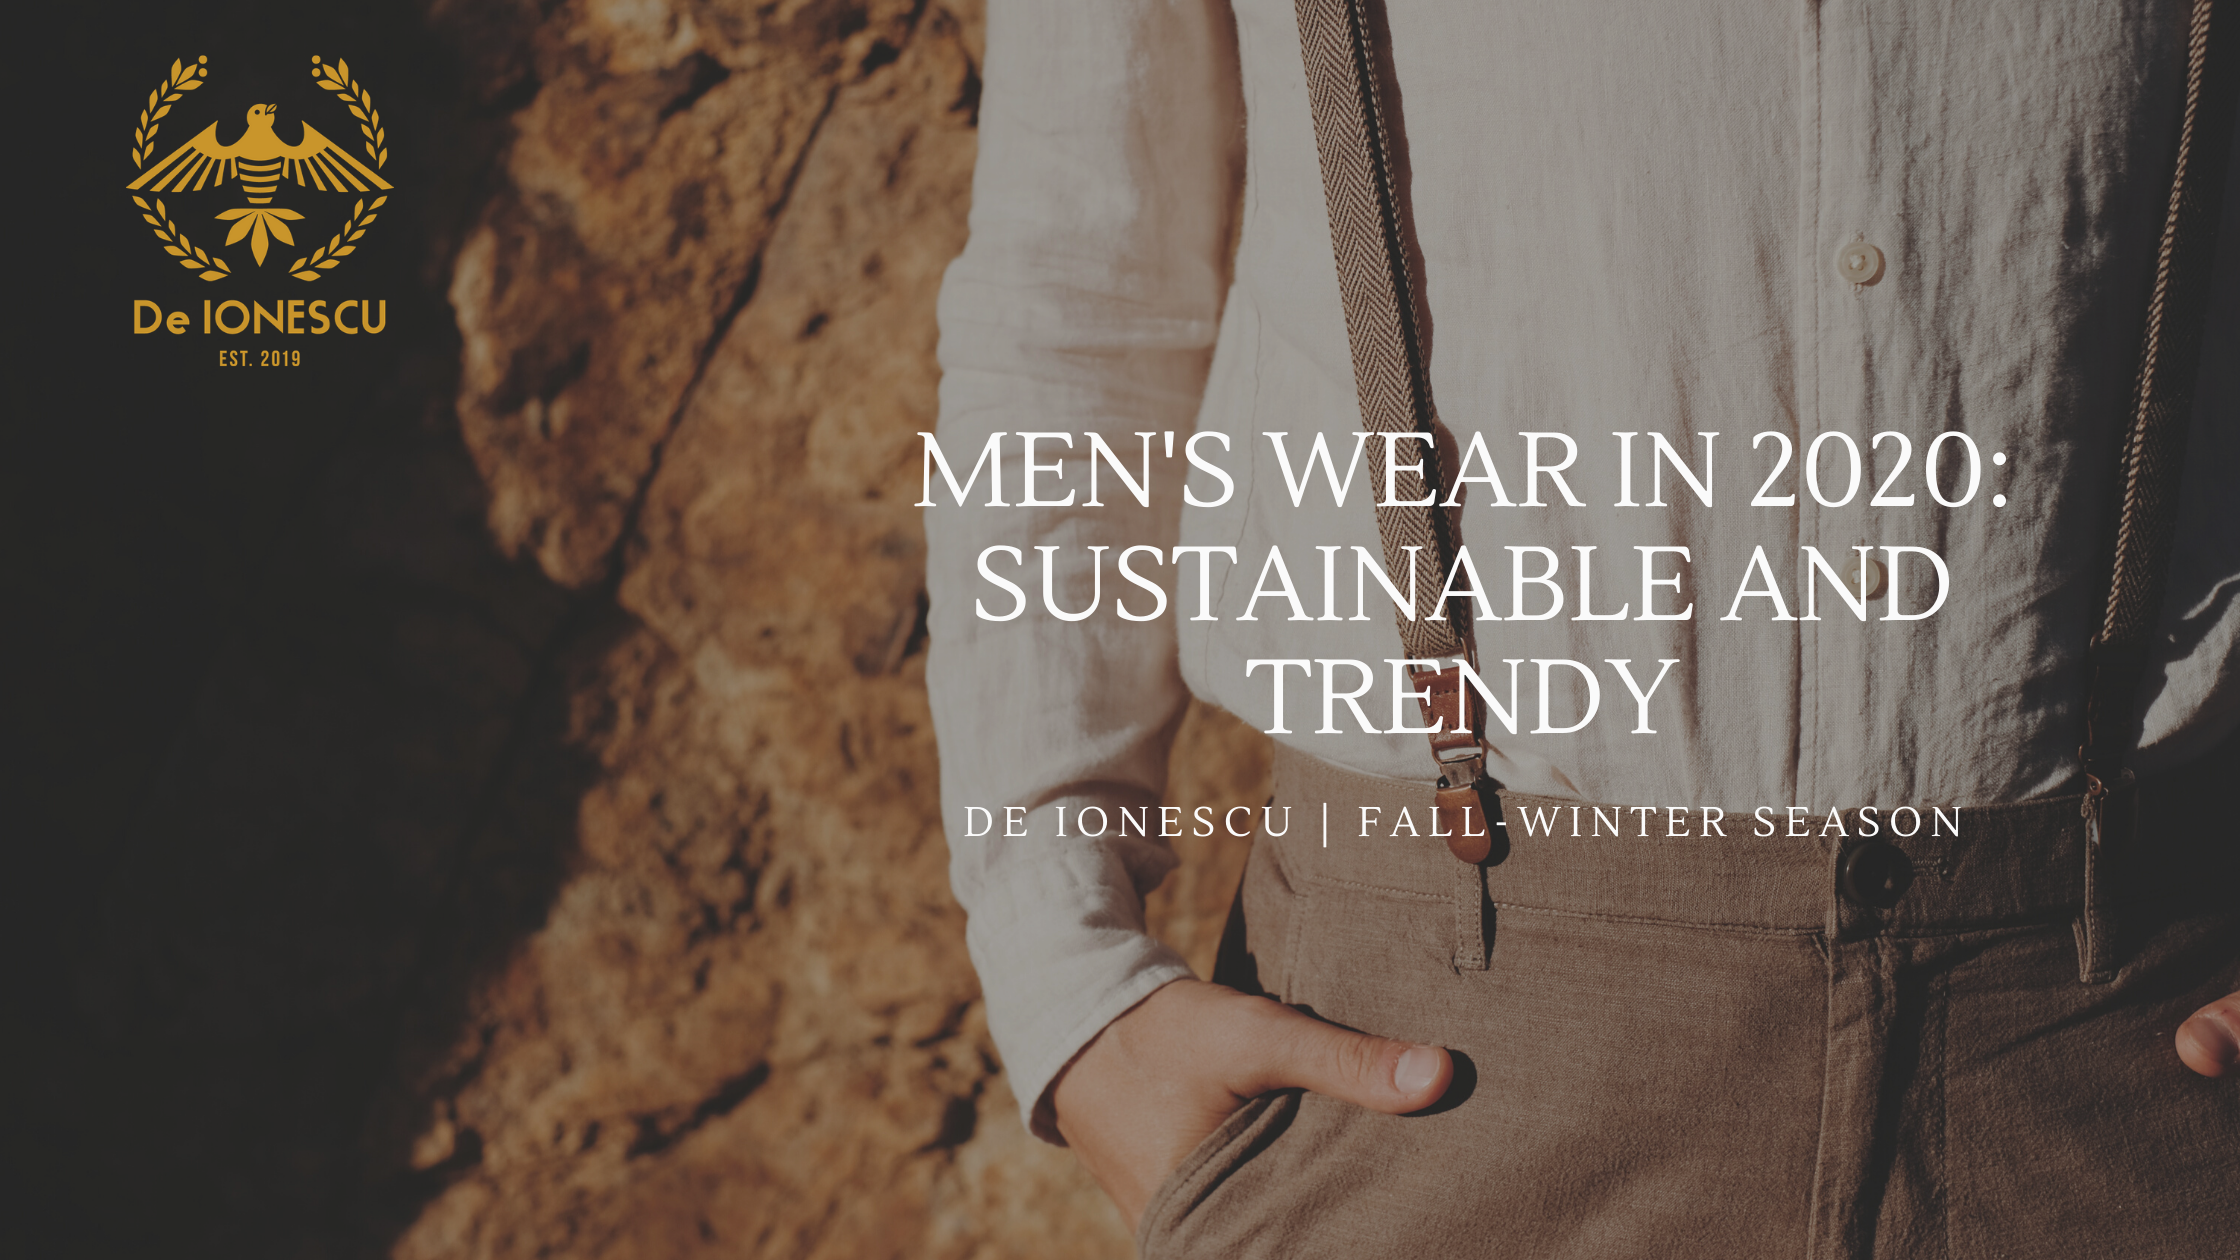 Men's wear in 2020: sustainable and trendy